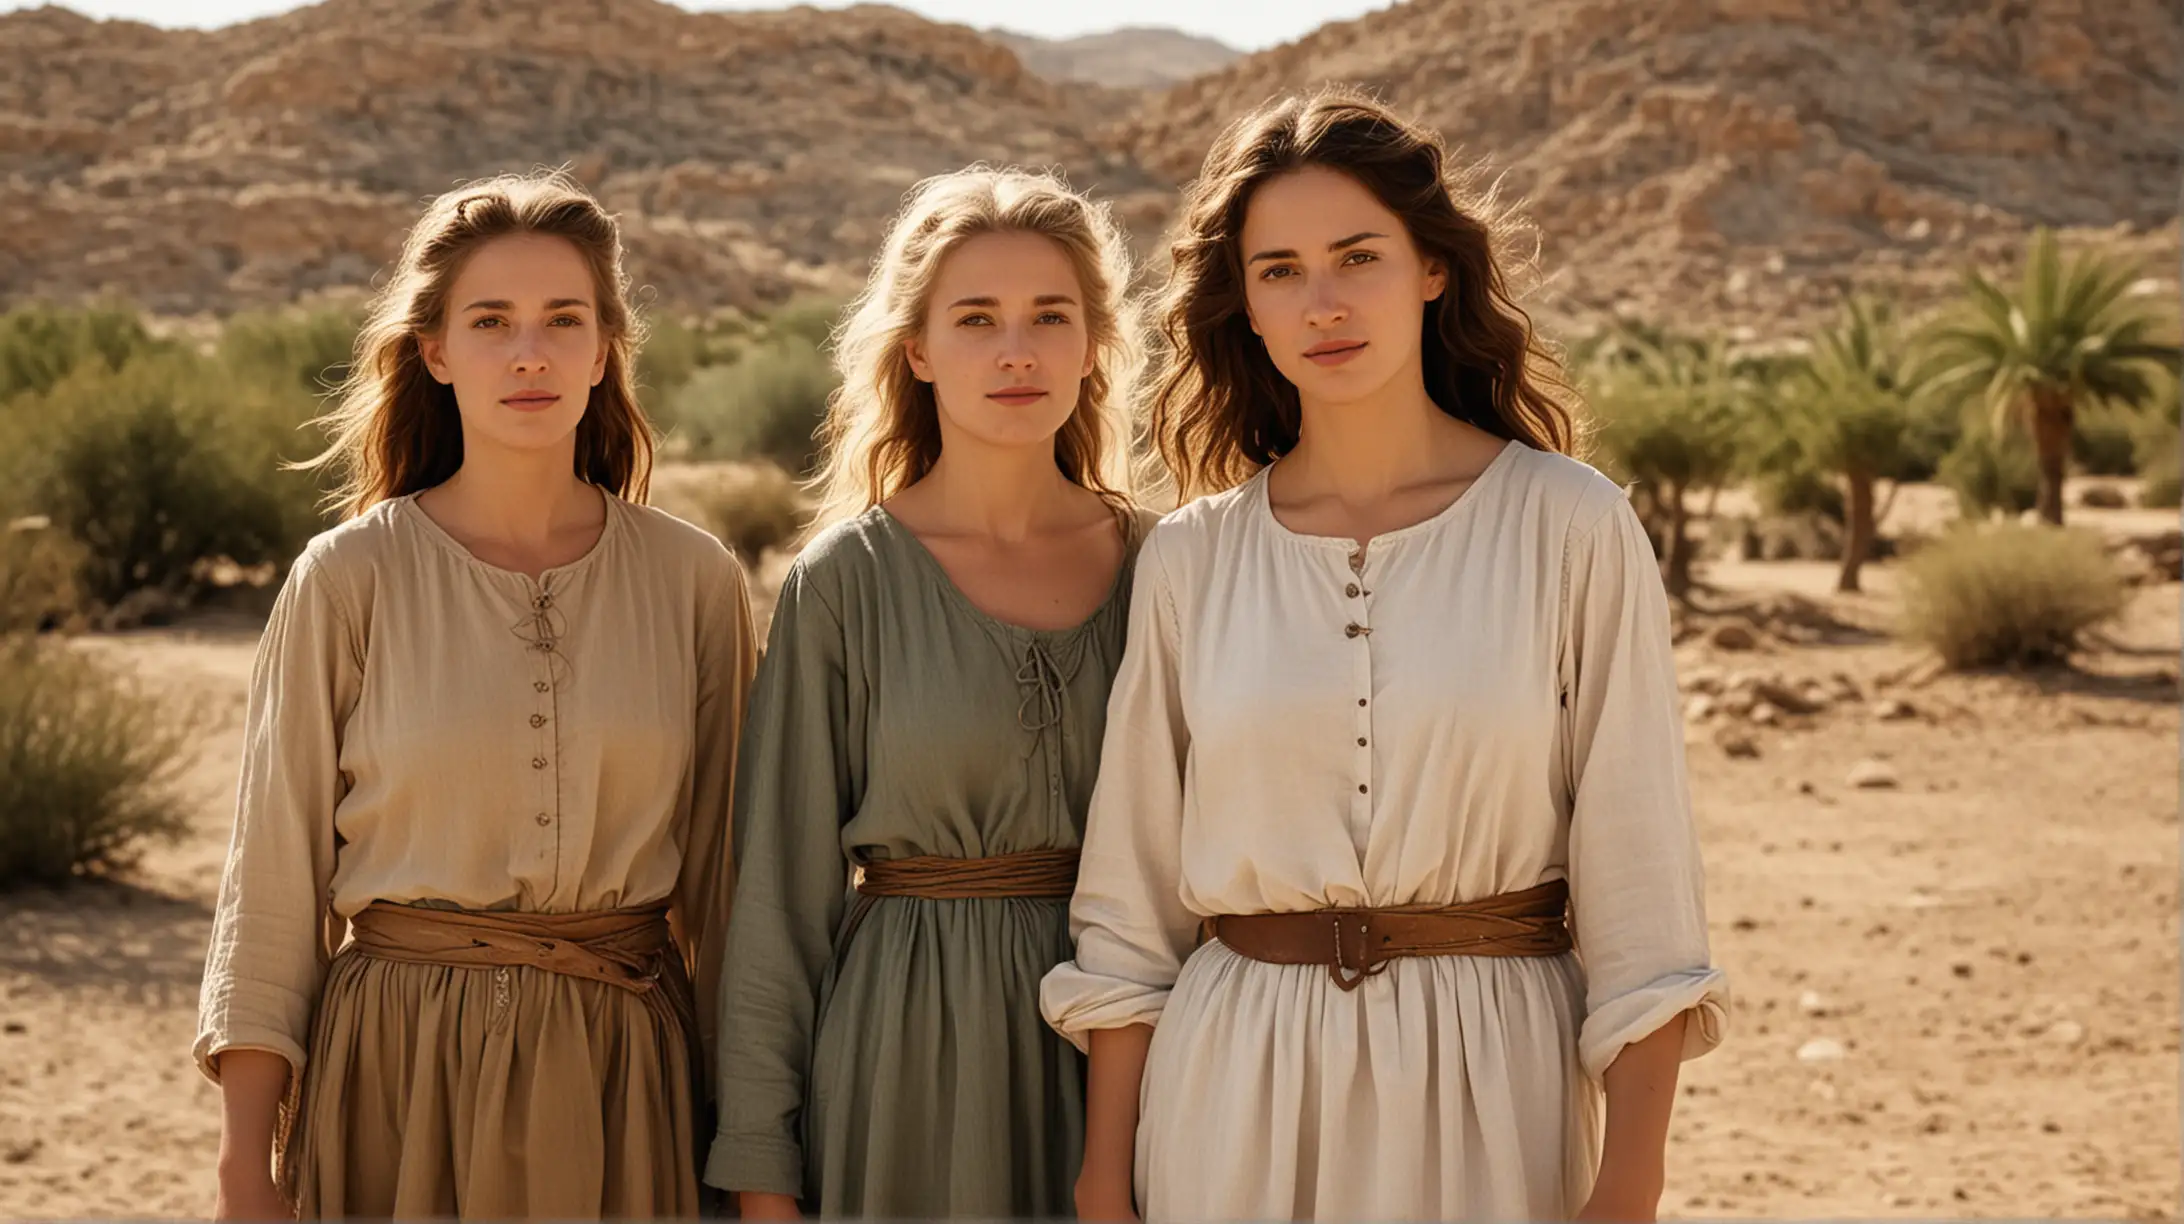 3 attractive women of varying ages, Set on a desert farm , During the Biblical era of  Jesus